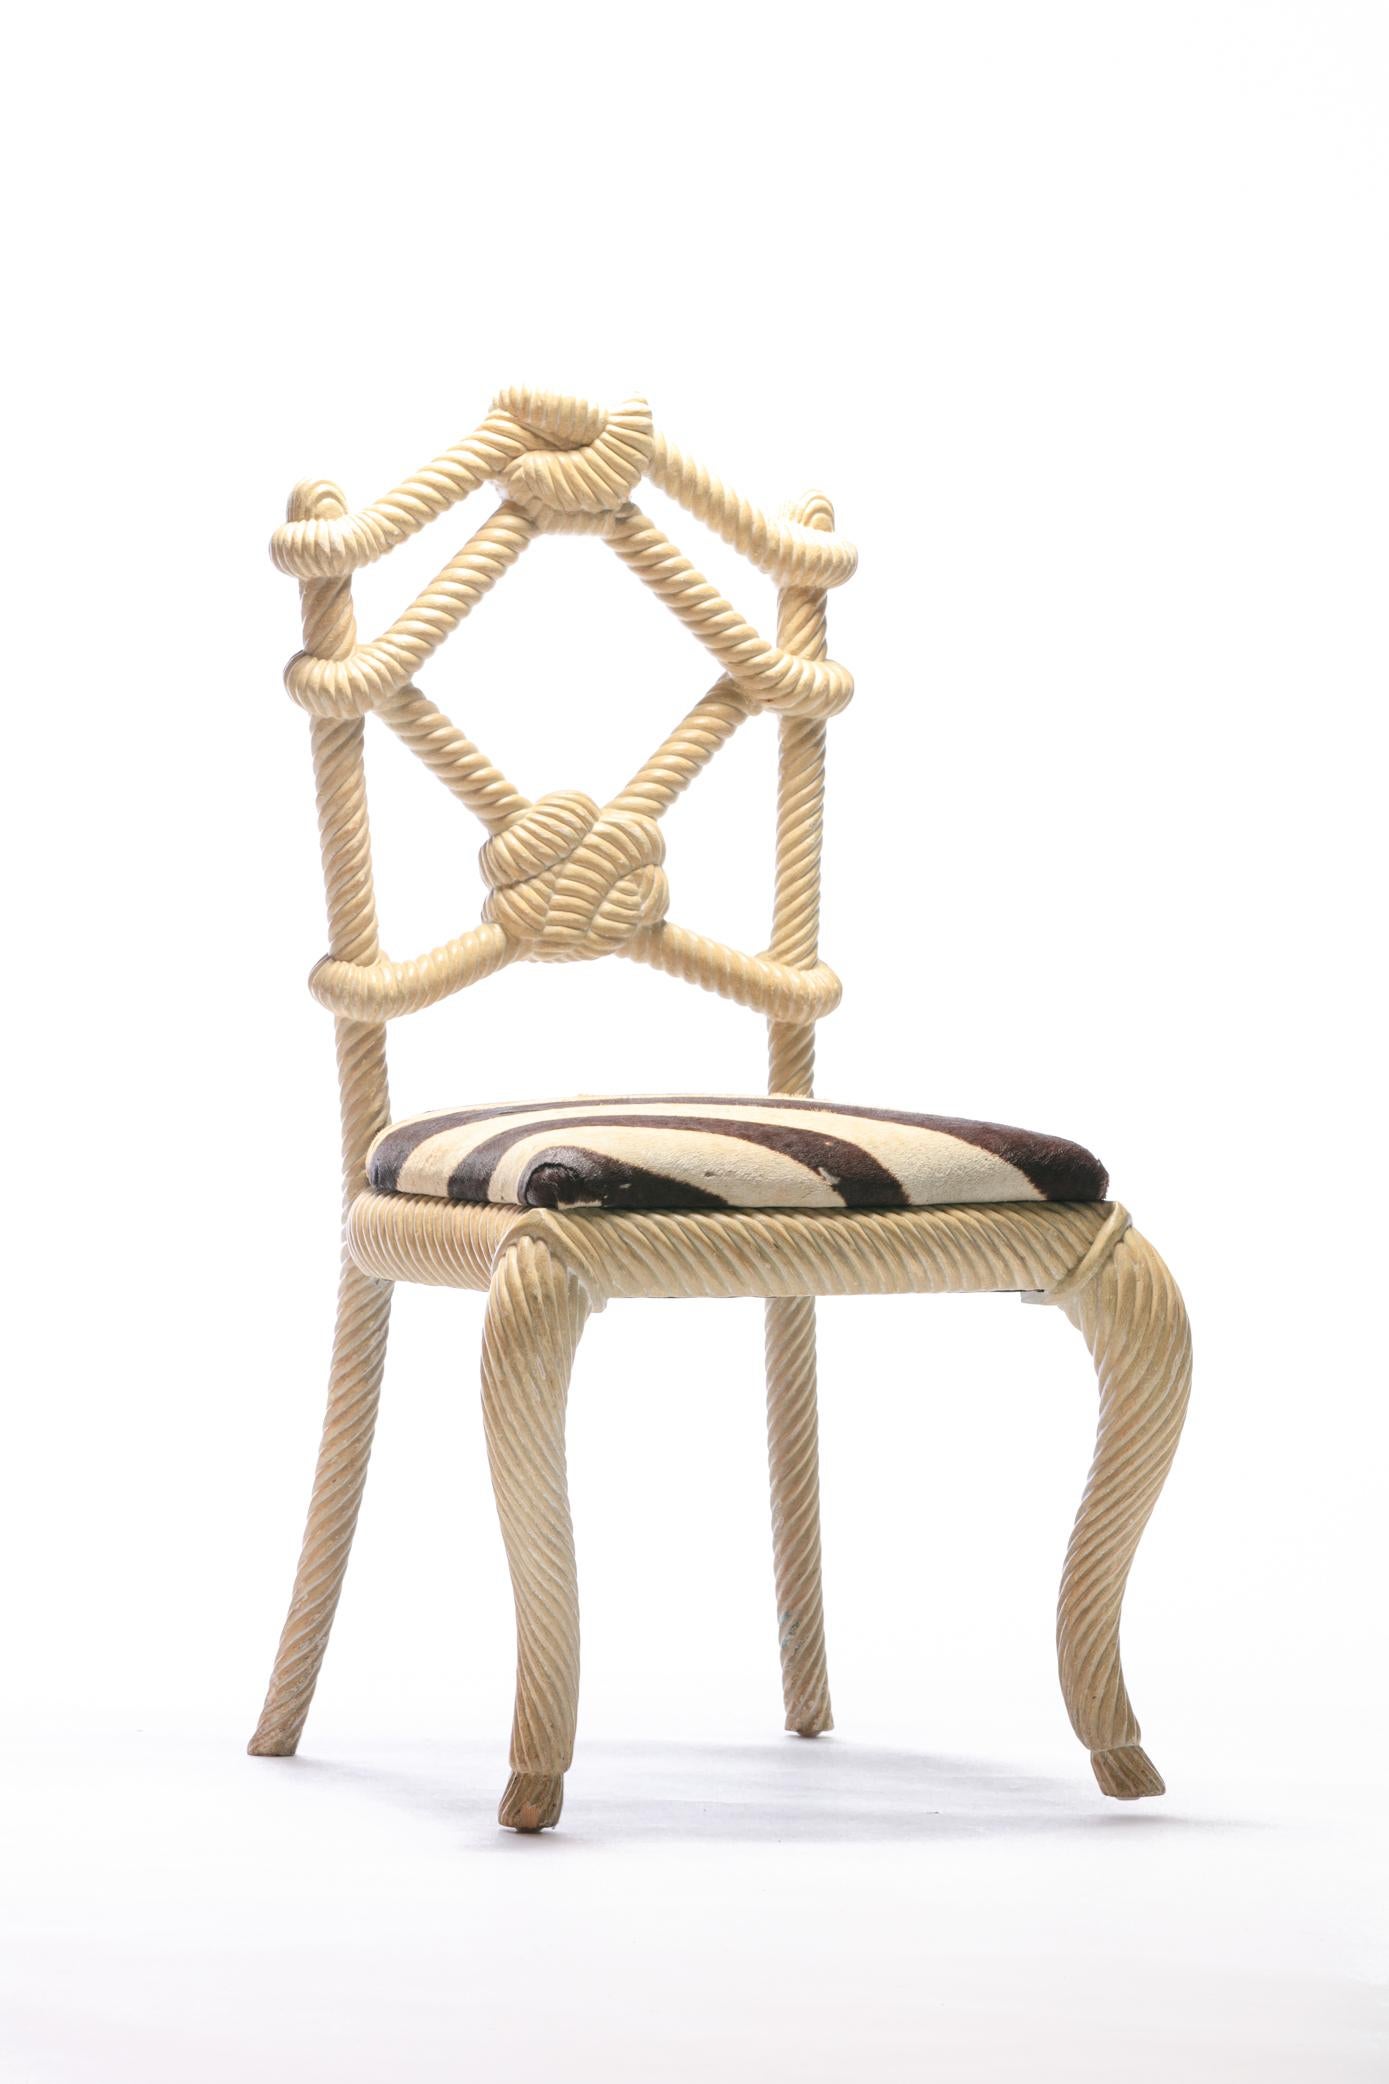 Contemporary Pair of Rope Chairs from Viceroy Miami with Zebra Hide Upholstered Seats For Sale